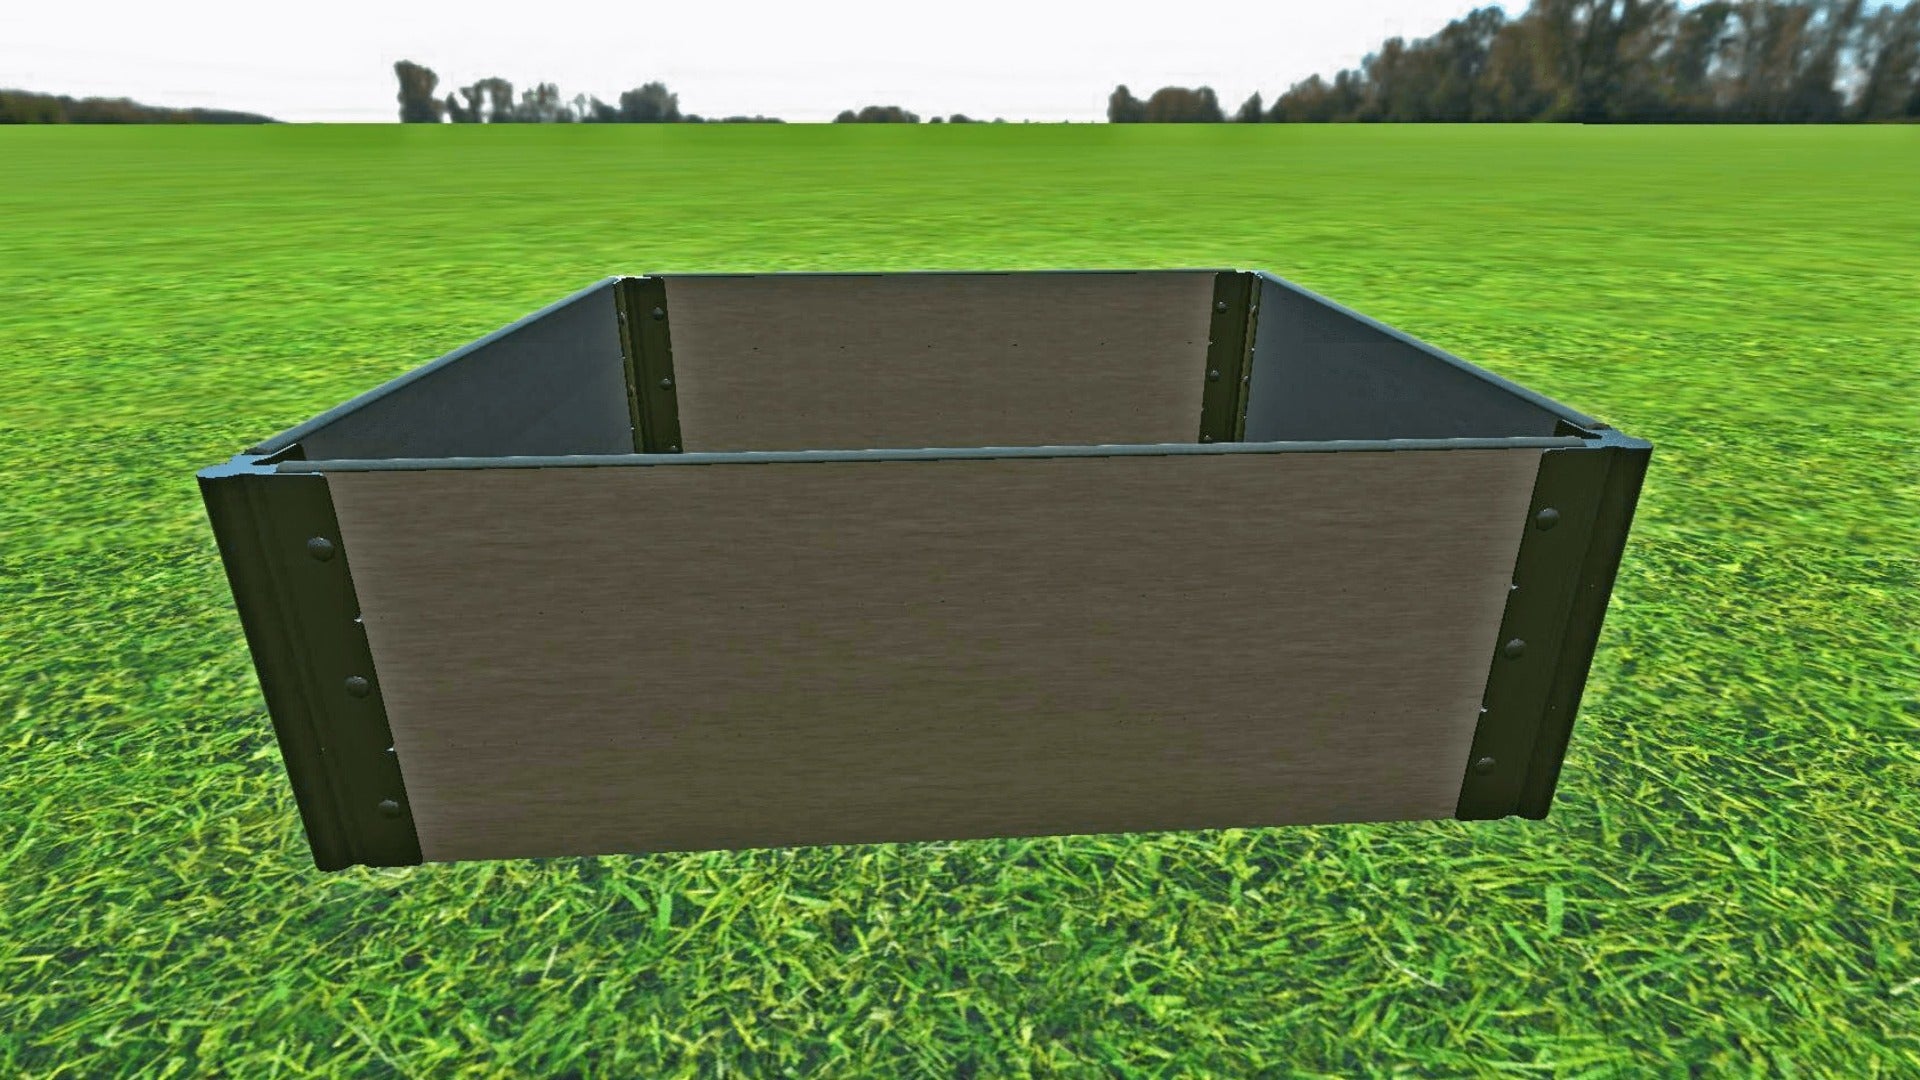 Tool-Free 4' x 4' Raised Garden Bed Raised Garden Beds Frame It All Weathered Wood 1" 3 = 16.5"